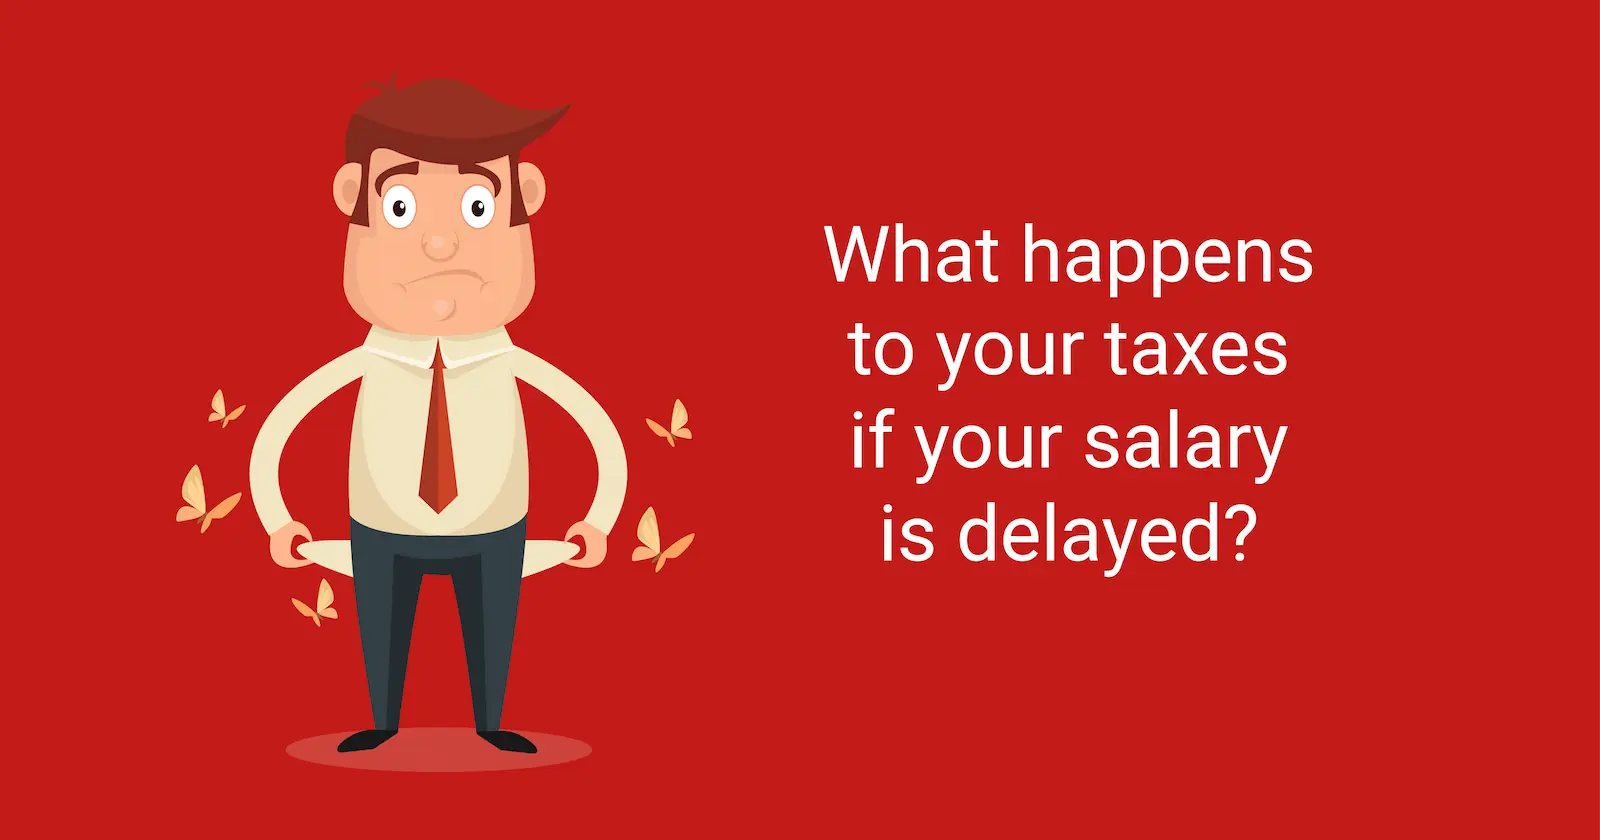 What happens to your taxes if your salary is delayed?